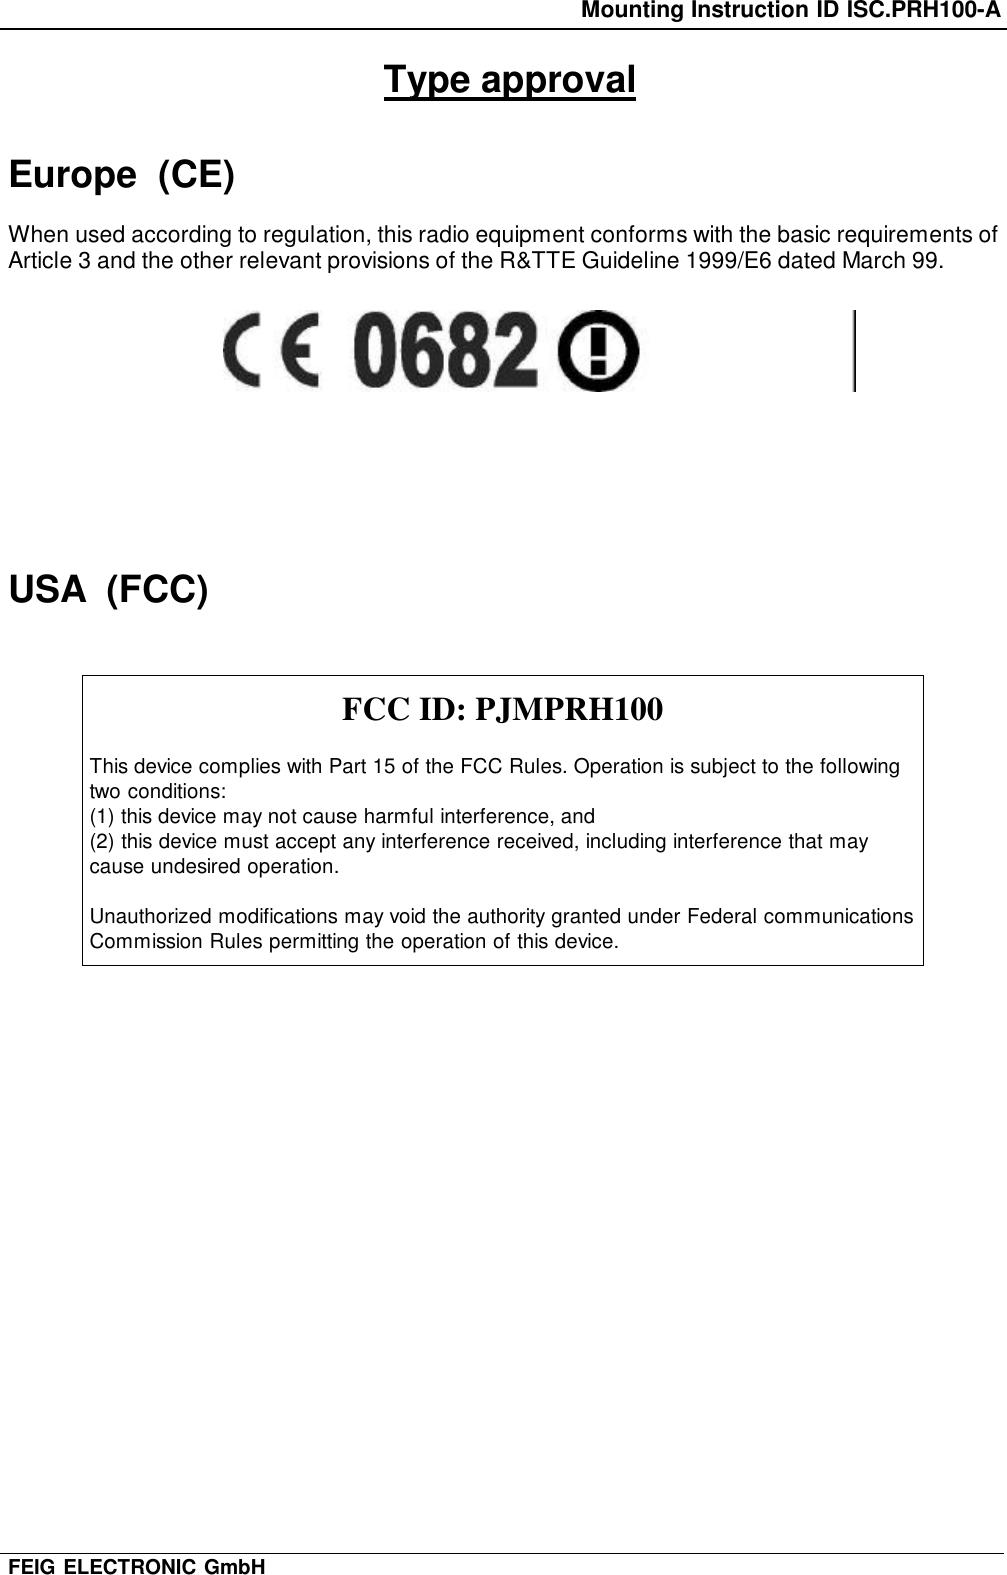 Mounting Instruction ID ISC.PRH100-AFEIG ELECTRONIC GmbHType approvalEurope  (CE)When used according to regulation, this radio equipment conforms with the basic requirements ofArticle 3 and the other relevant provisions of the R&amp;TTE Guideline 1999/E6 dated March 99.USA  (FCC)FCC ID: PJMPRH100This device complies with Part 15 of the FCC Rules. Operation is subject to the followingtwo conditions:(1) this device may not cause harmful interference, and(2) this device must accept any interference received, including interference that maycause undesired operation.Unauthorized modifications may void the authority granted under Federal communicationsCommission Rules permitting the operation of this device.